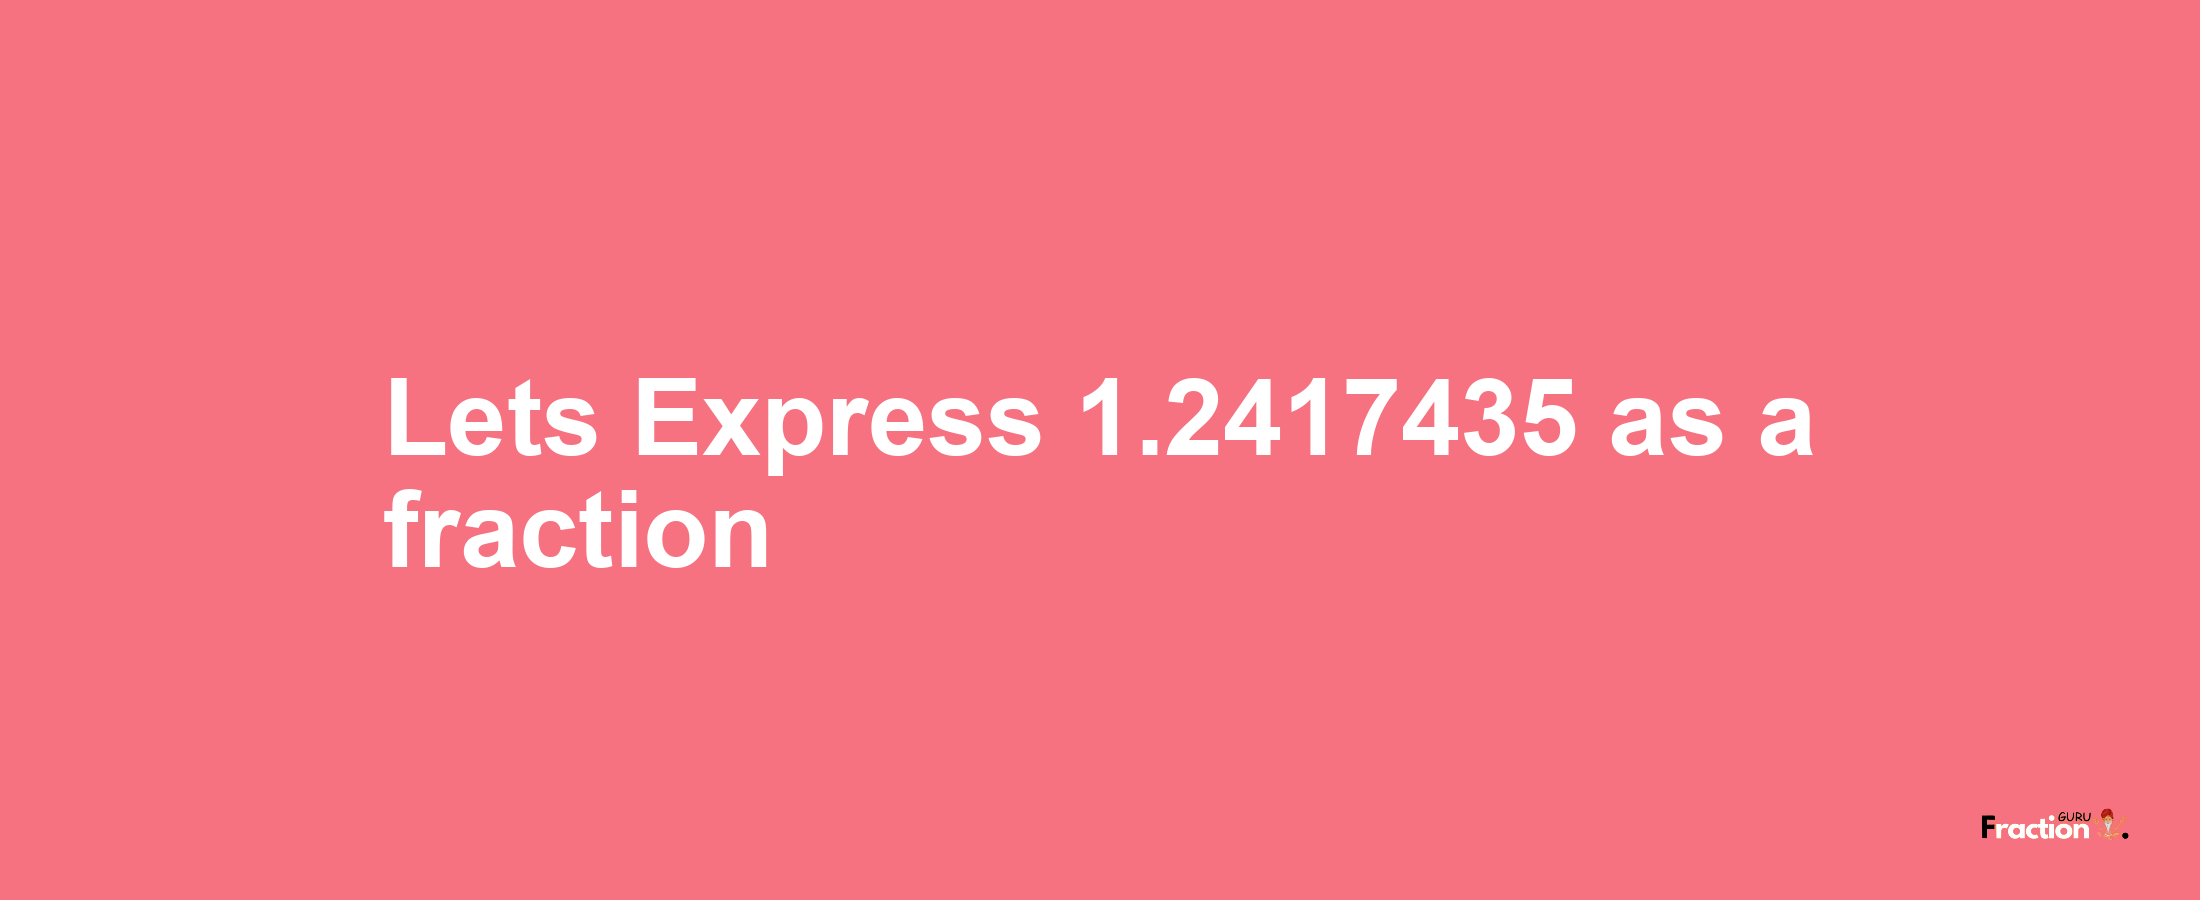 Lets Express 1.2417435 as afraction